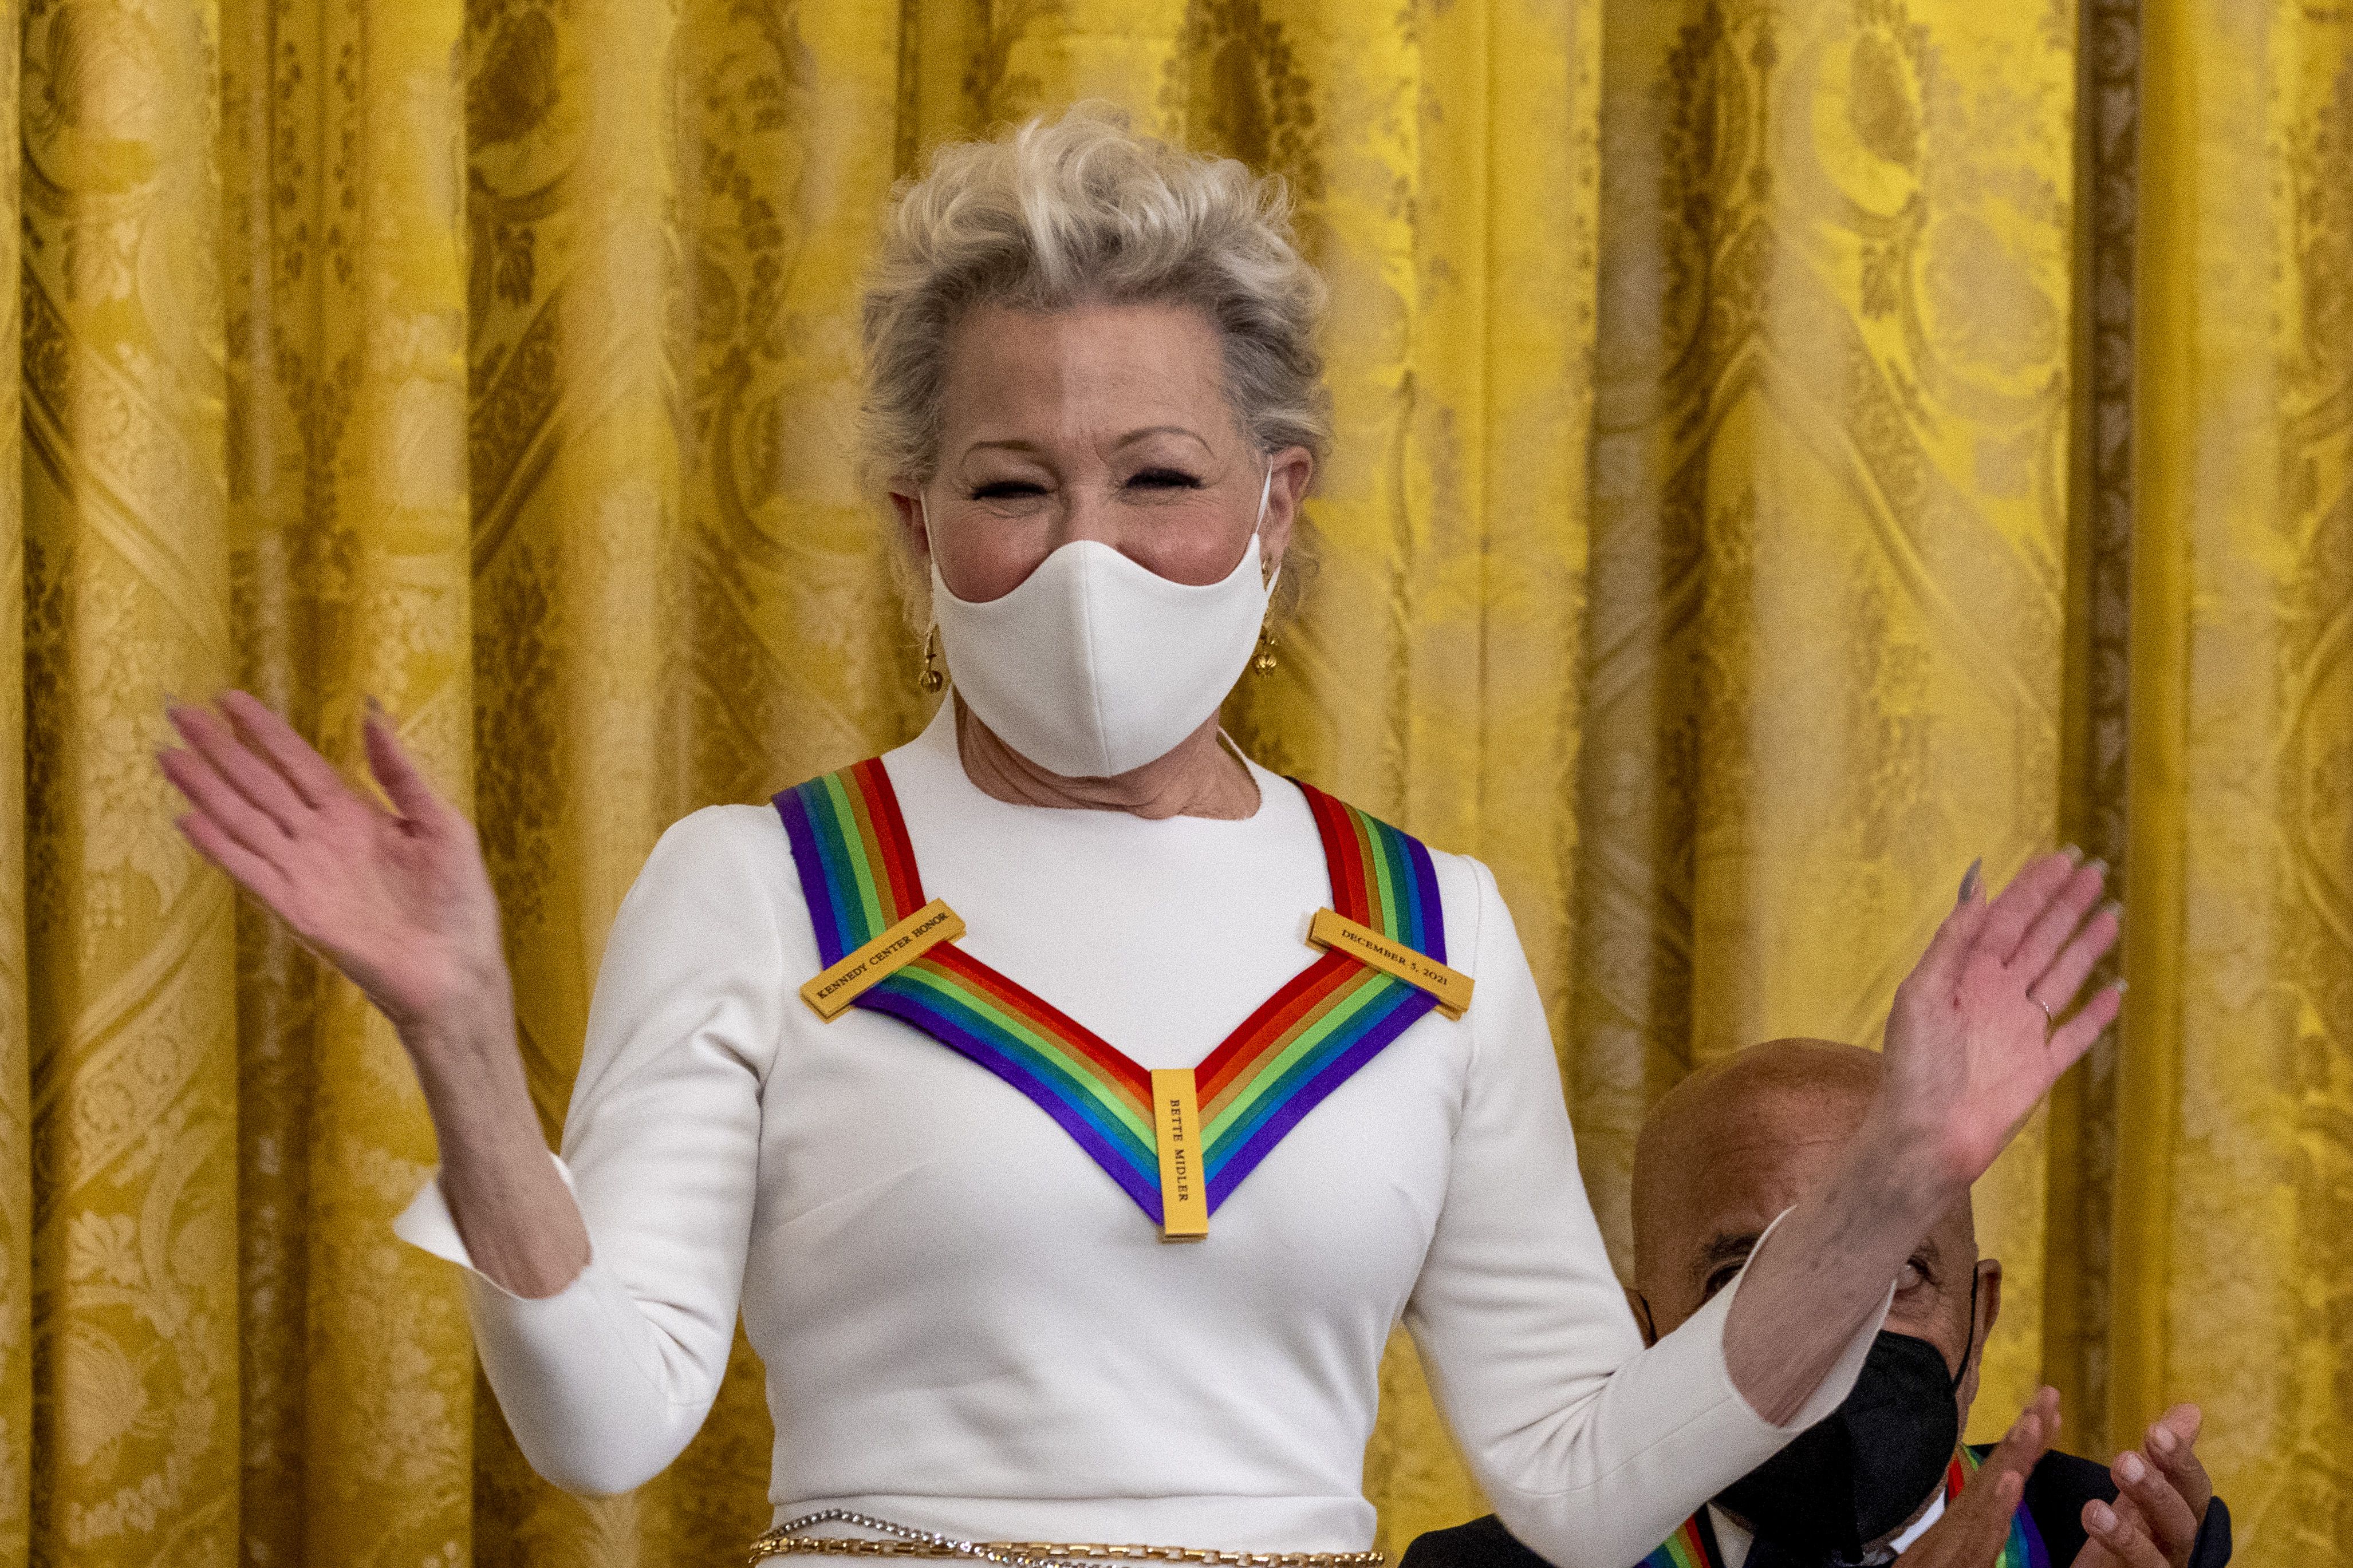 Bette Middler at the Kennedy Center Honors reception